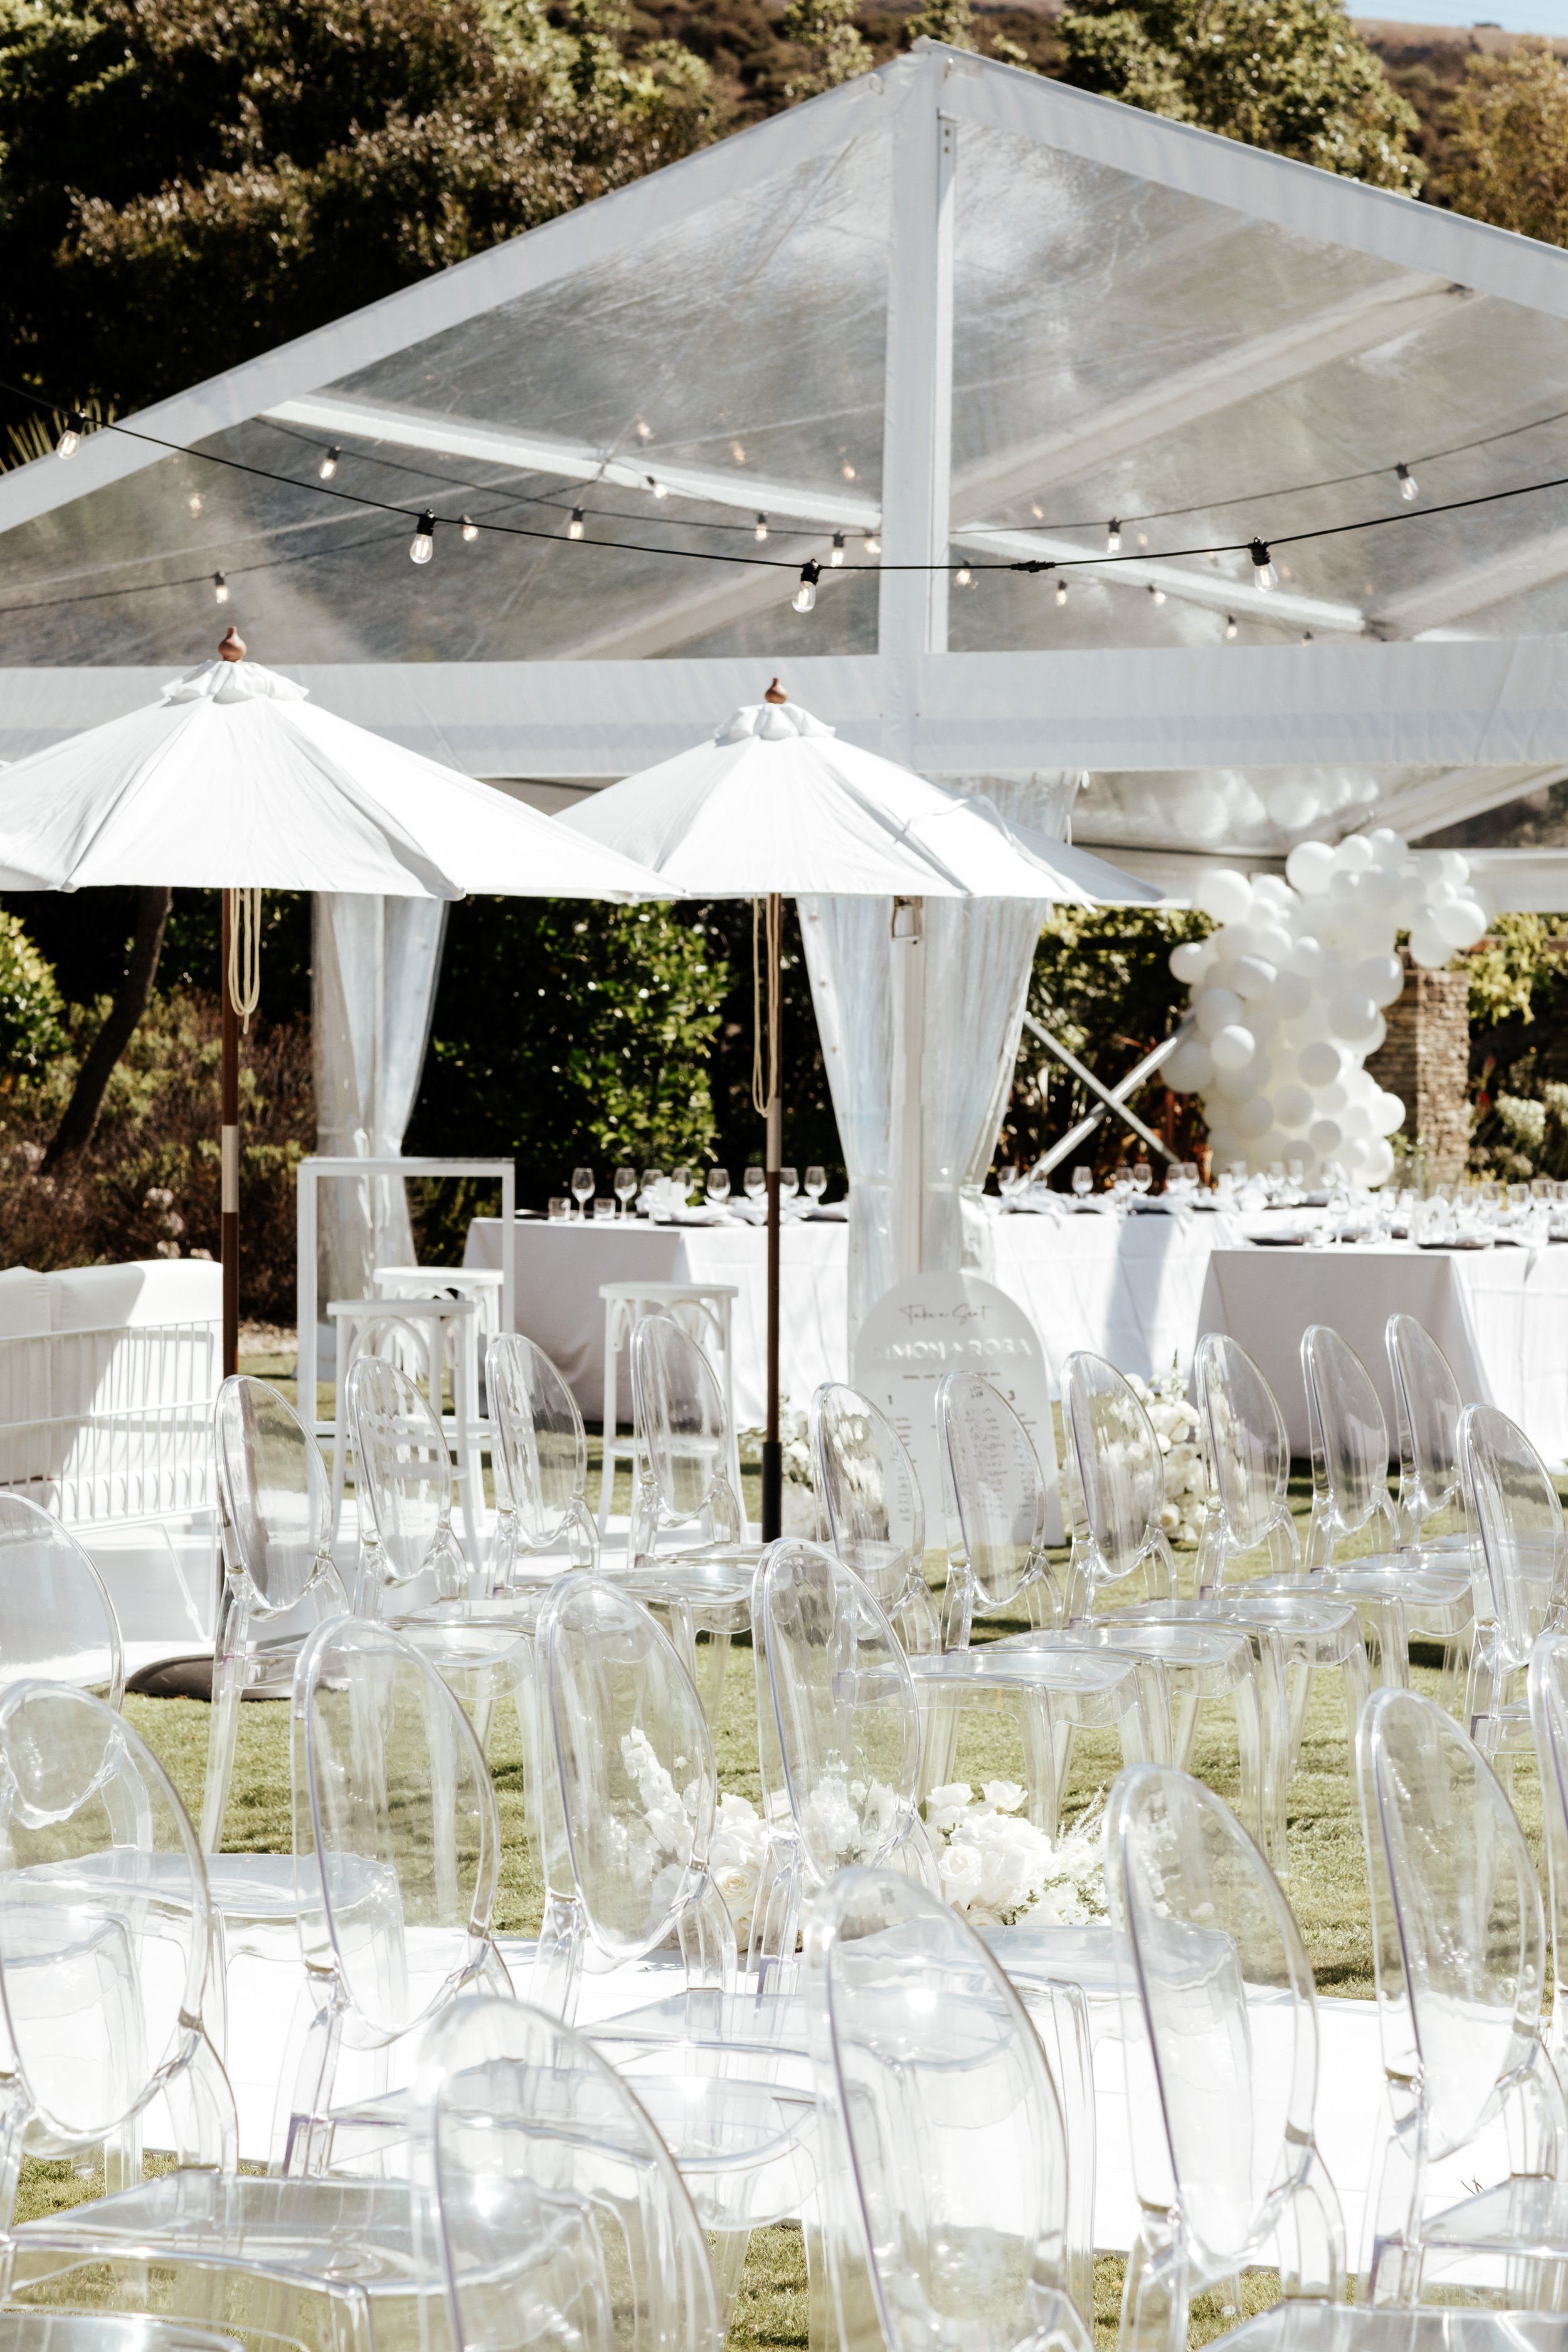 White clear marquee Hire - Christchurch, Wanaka Queenstown Truly Yours